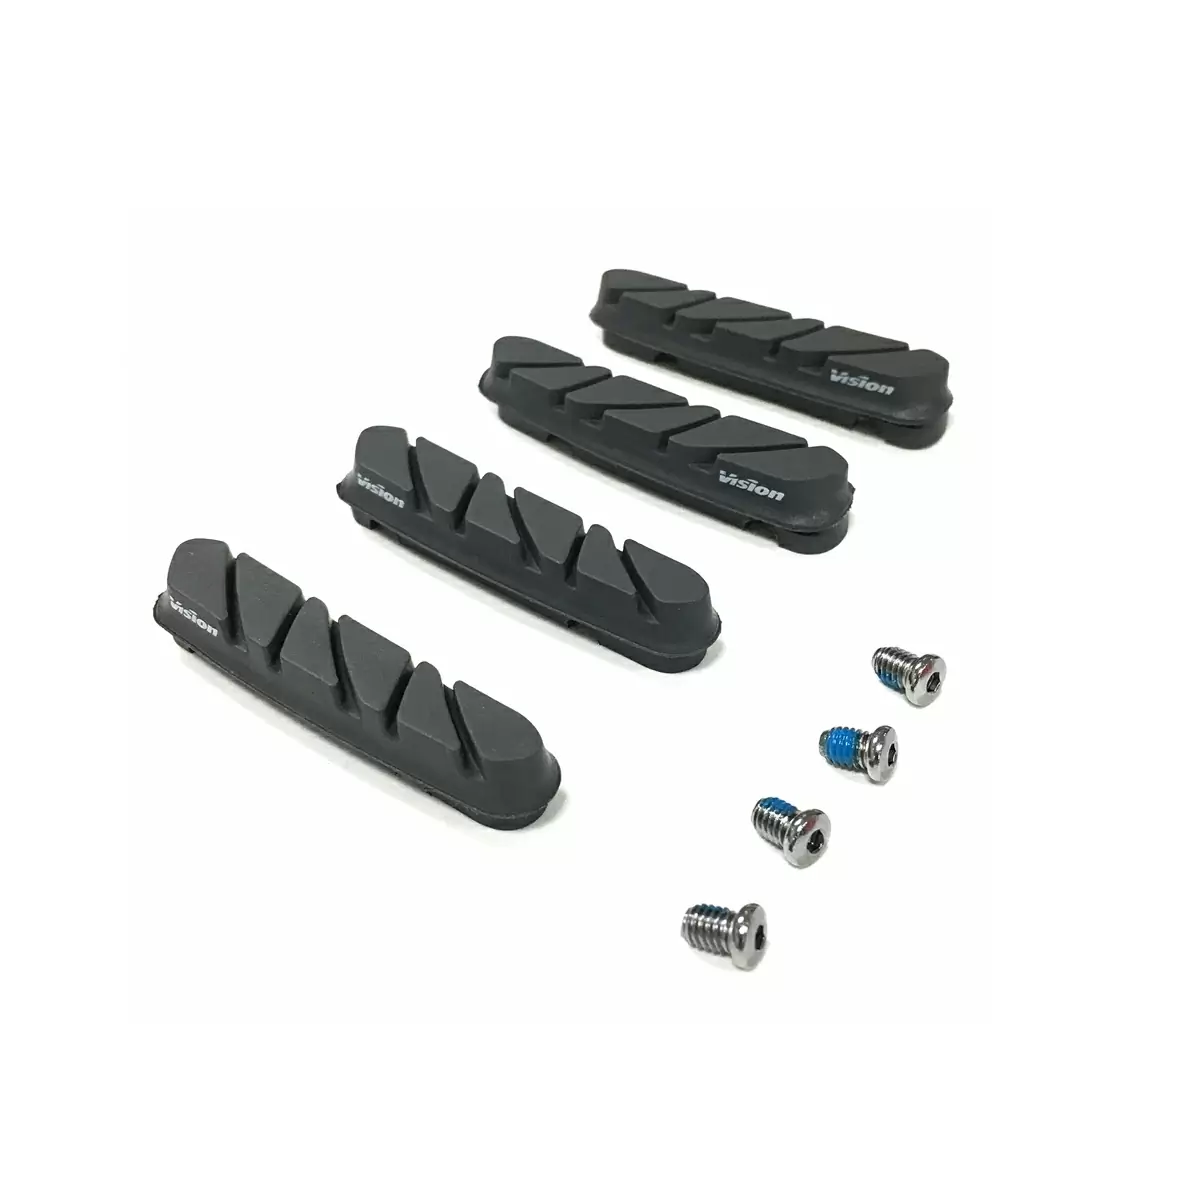 Brake pads T-83 for carbon rims compatible Shimano 4 pieces for packaging E0065 - image